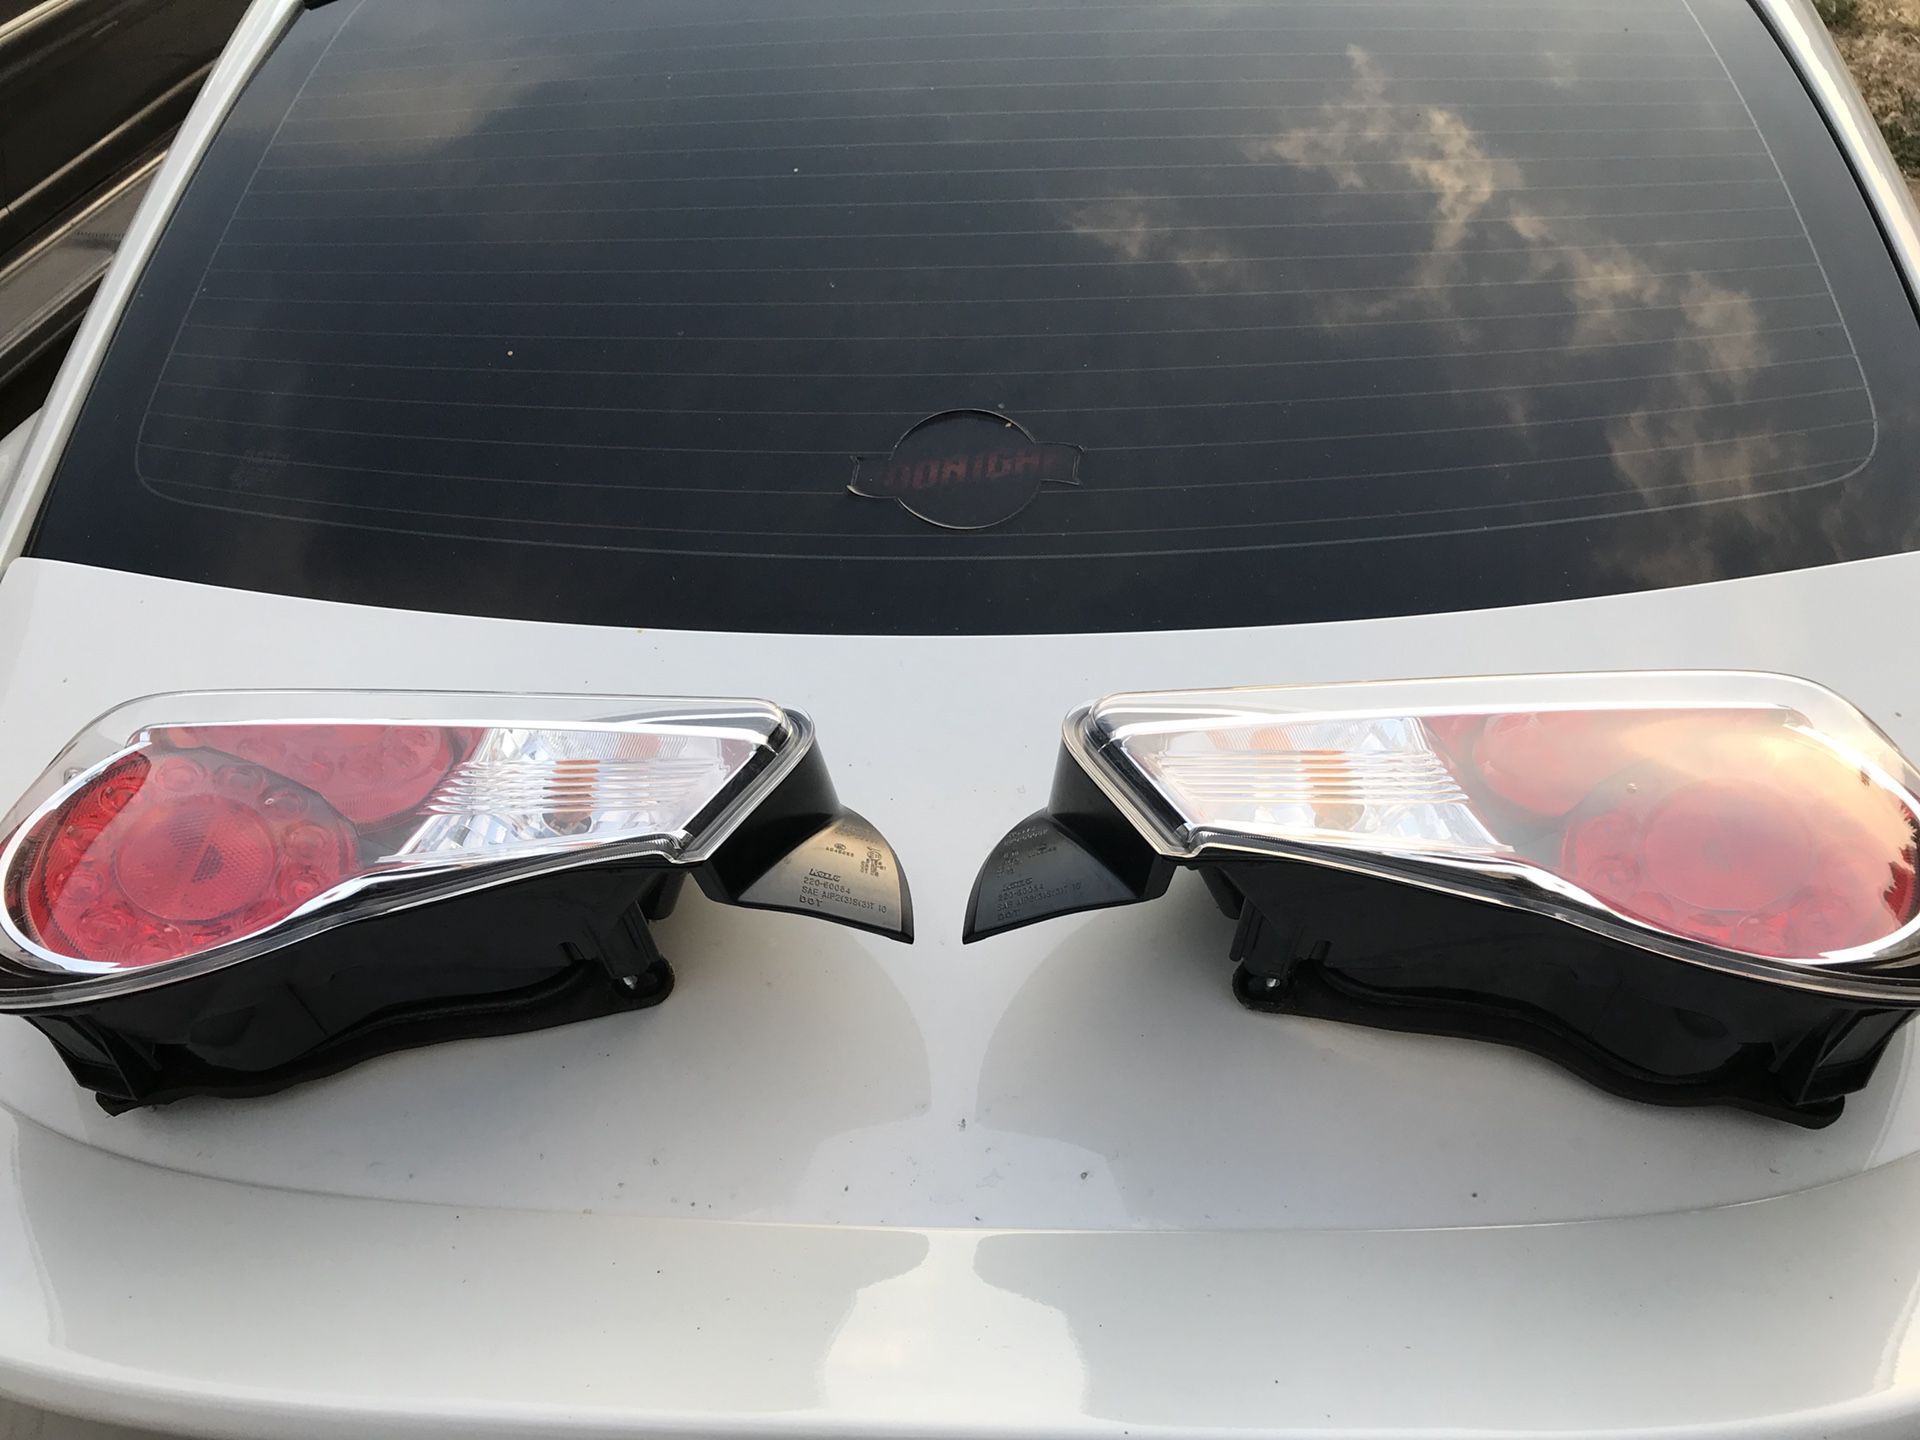 Frs taillights